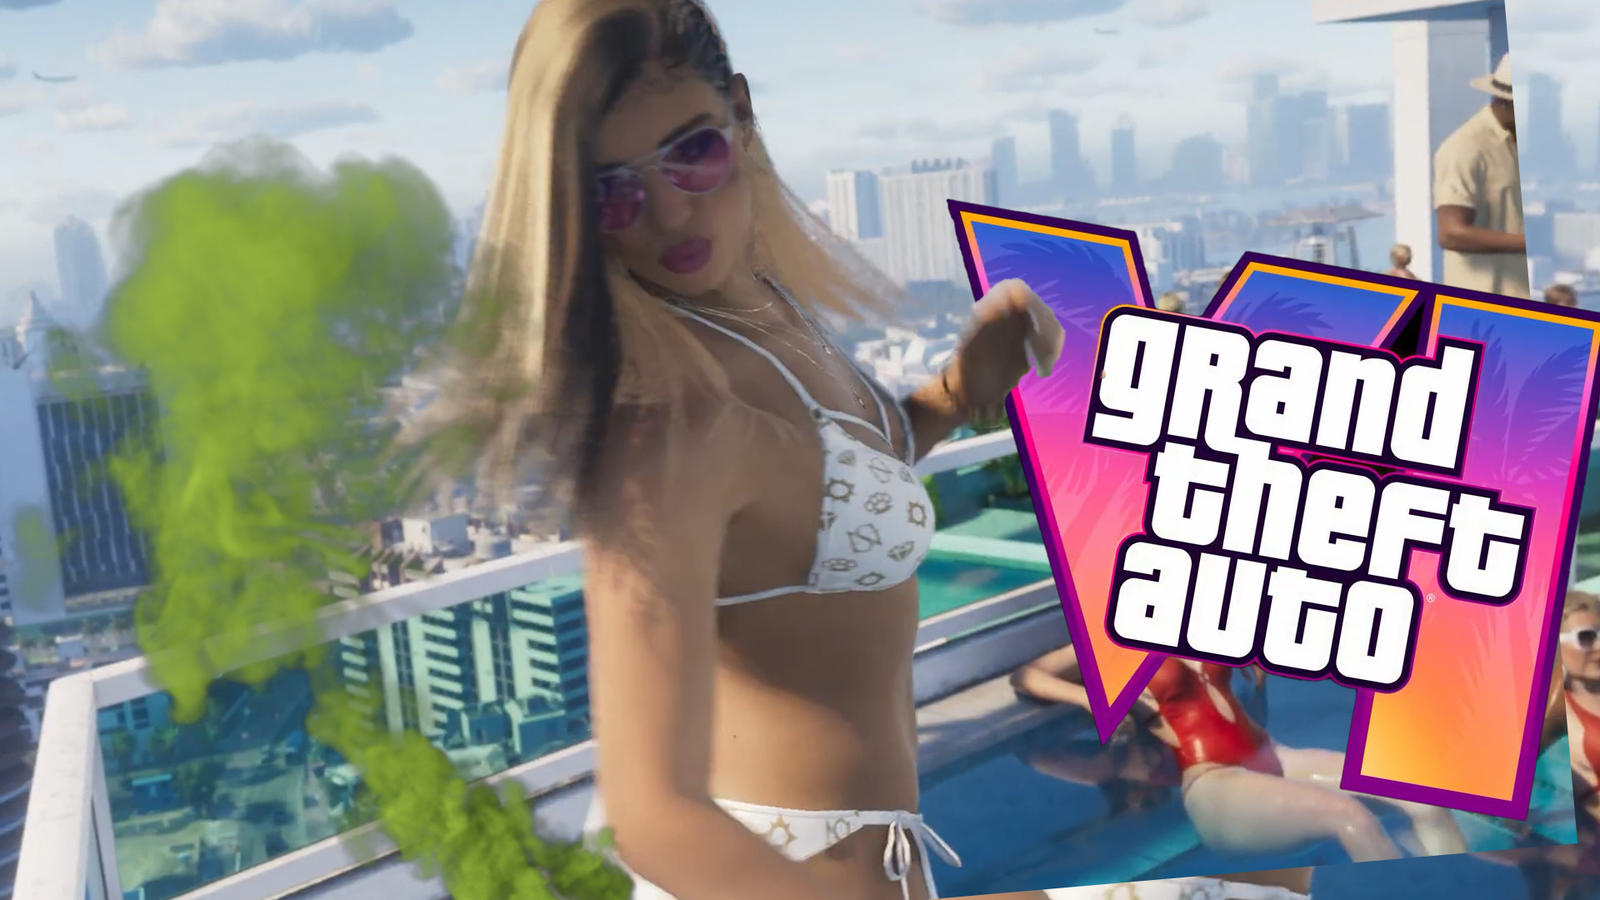 This is GTA 6 Finally! 